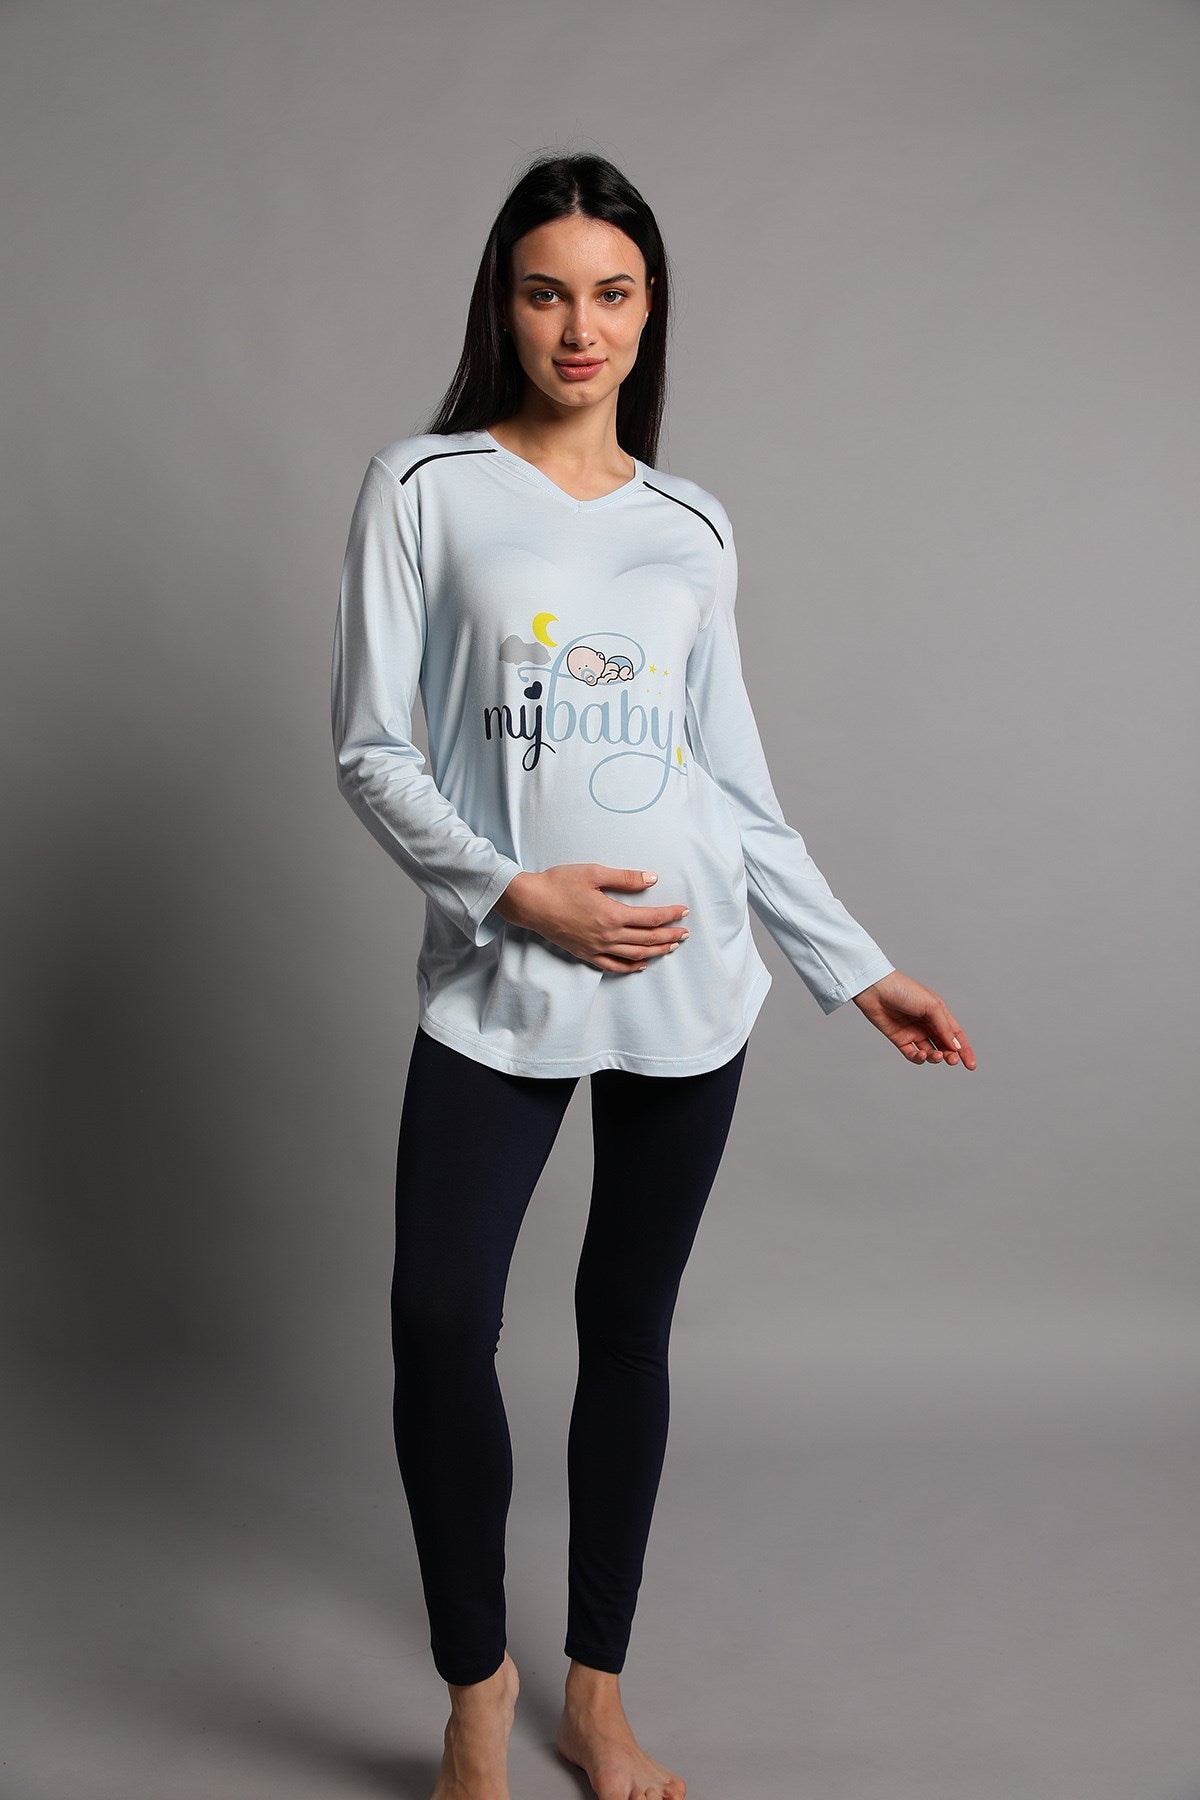 Shopymommy 5345 My Baby Maternity T-Shirt & Tights Set Blue